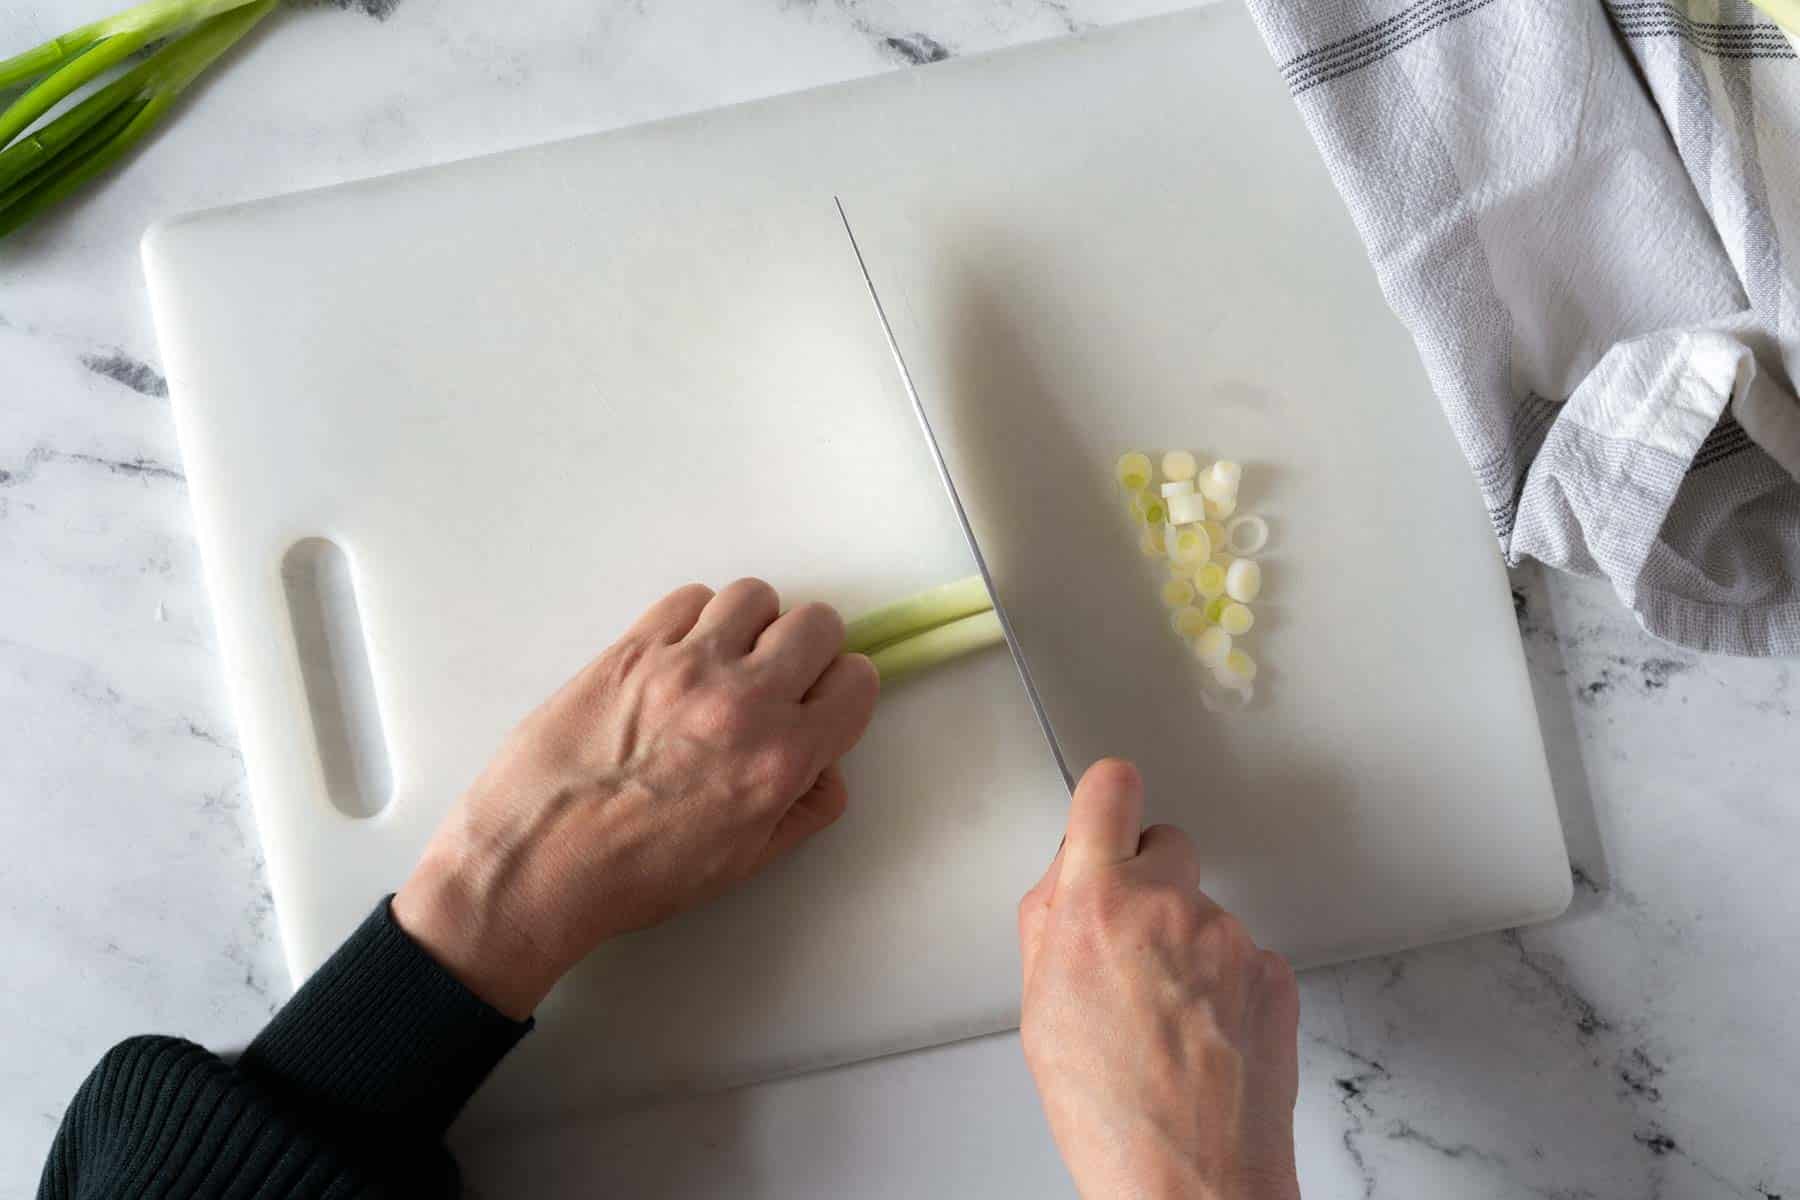 Slicing an onion into small rounds.